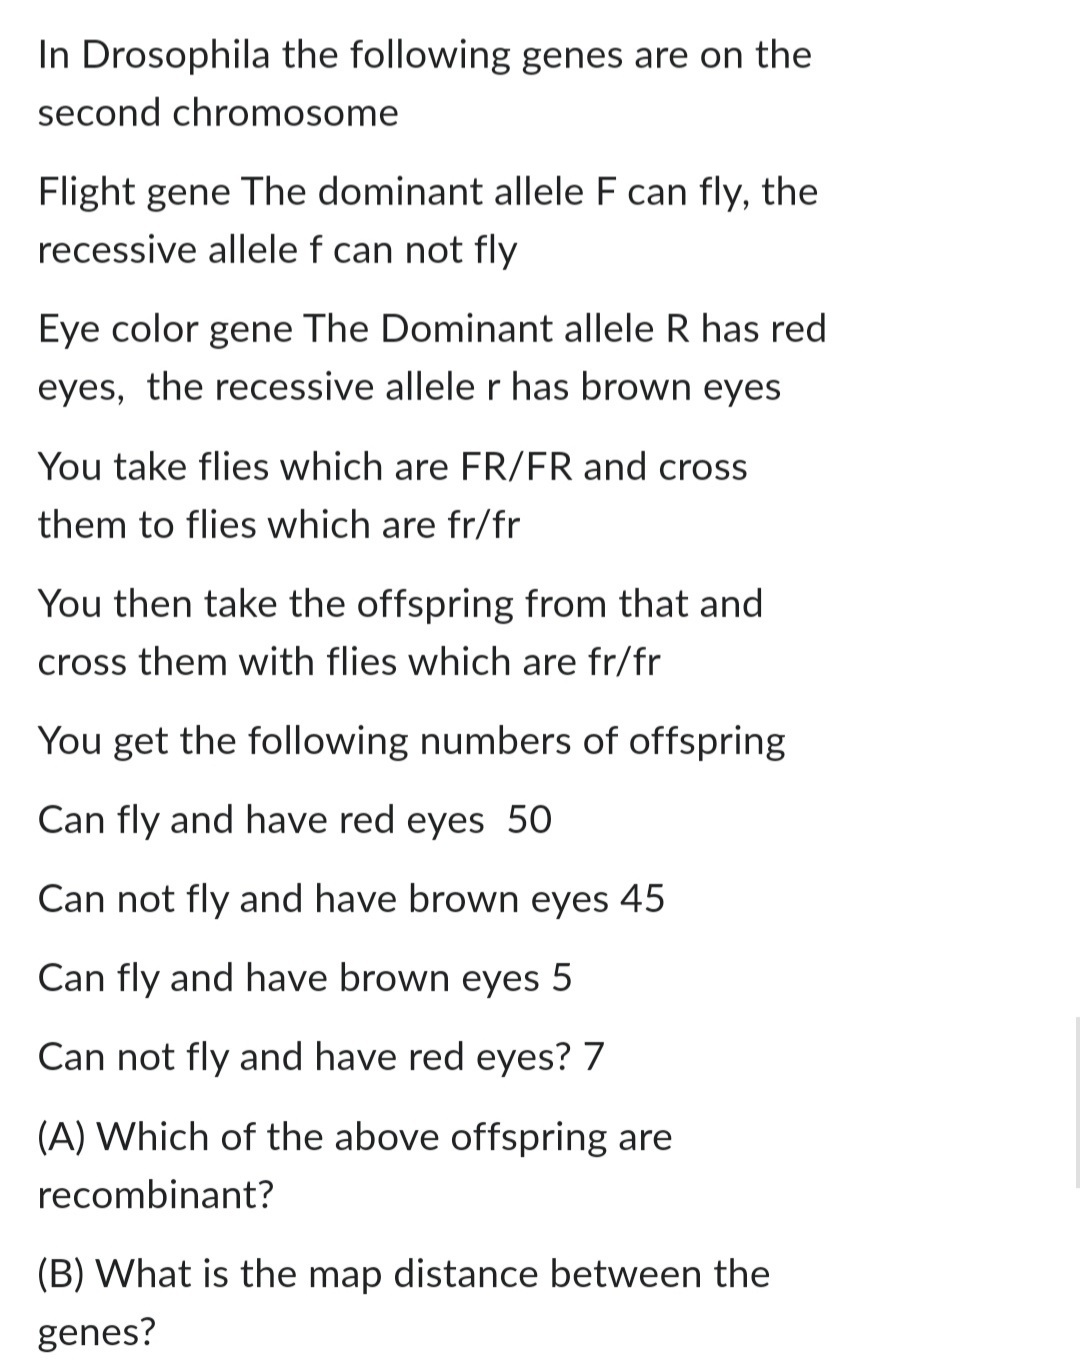 In Drosophila the following genes are on the
second chromosome
Flight gene The dominant allele F can fly, the
recessive allele f can not fly
Eye color gene The Dominant allele R has red
eyes, the recessive allele r has brown eyes
You take flies which are FR/FR and cross
them to flies which are fr/fr
You then take the offspring from that and
cross them with flies which are fr/fr
You get the following numbers of offspring
Can fly and have red eyes 50
Can not fly and have brown eyes 45
Can fly and have brown eyes 5
Can not fly and have red eyes? 7
(A) Which of the above offspring are
recombinant?
(B) What is the map distance between the
genes?